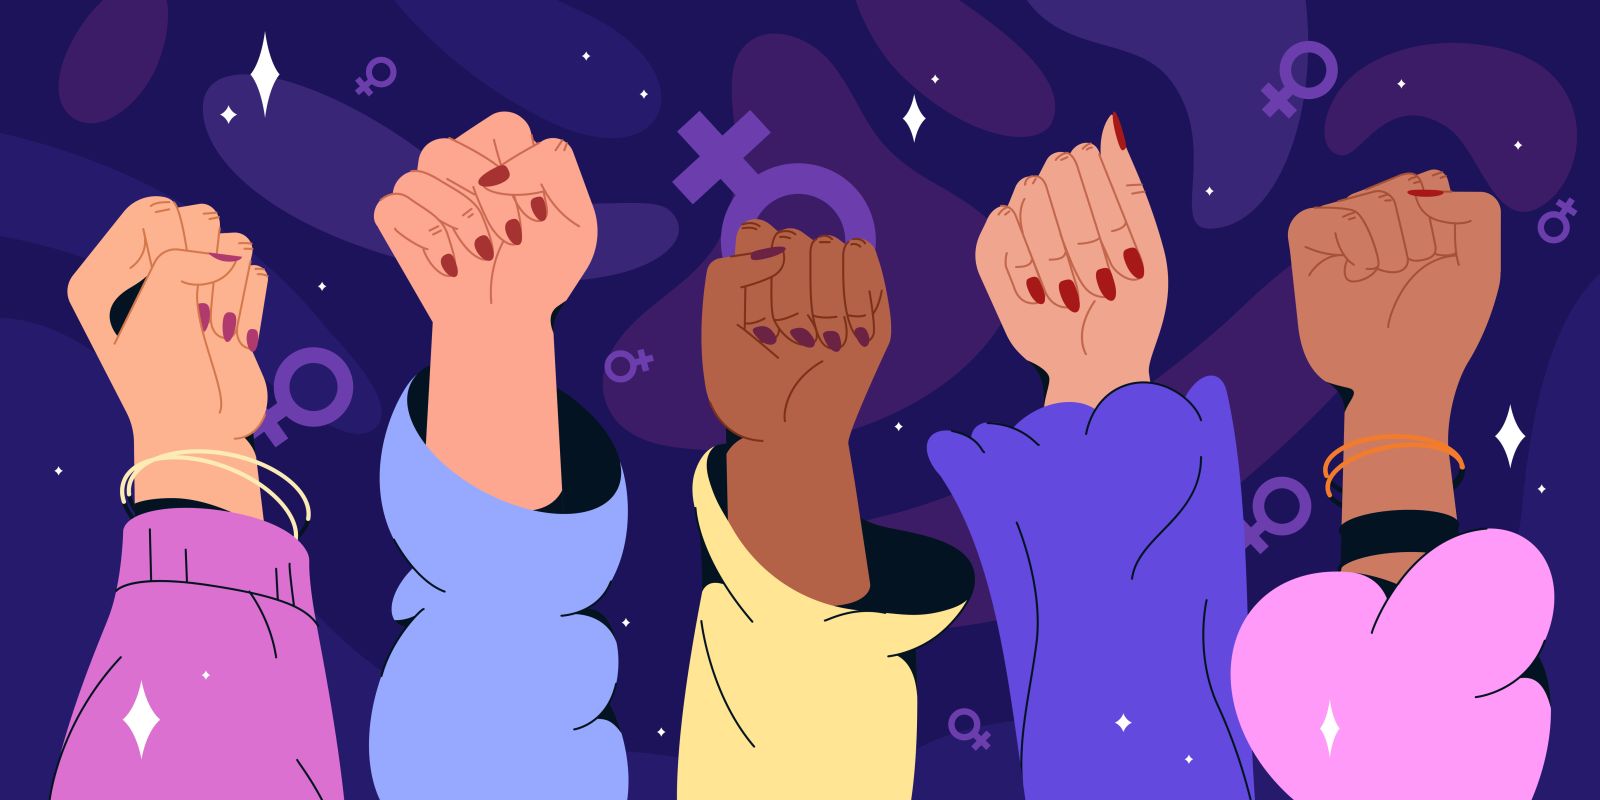 Female hands up on the air with the female gender sign behind them